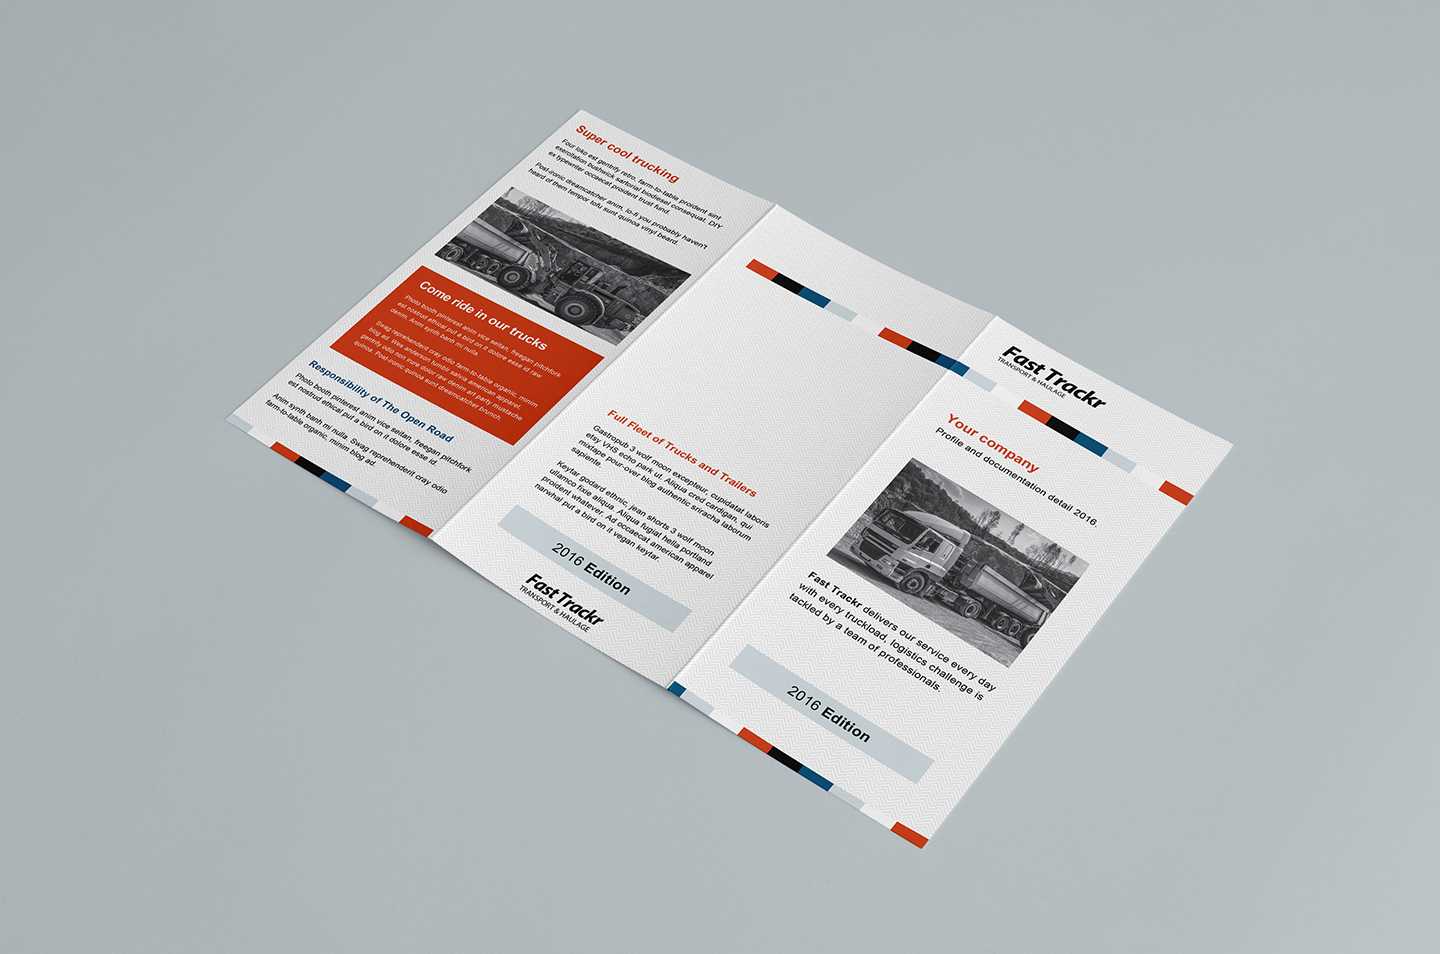 Free Trifold Brochure Template In Psd, Ai & Vector – Brandpacks With Regard To Tri Fold Brochure Template Illustrator Free